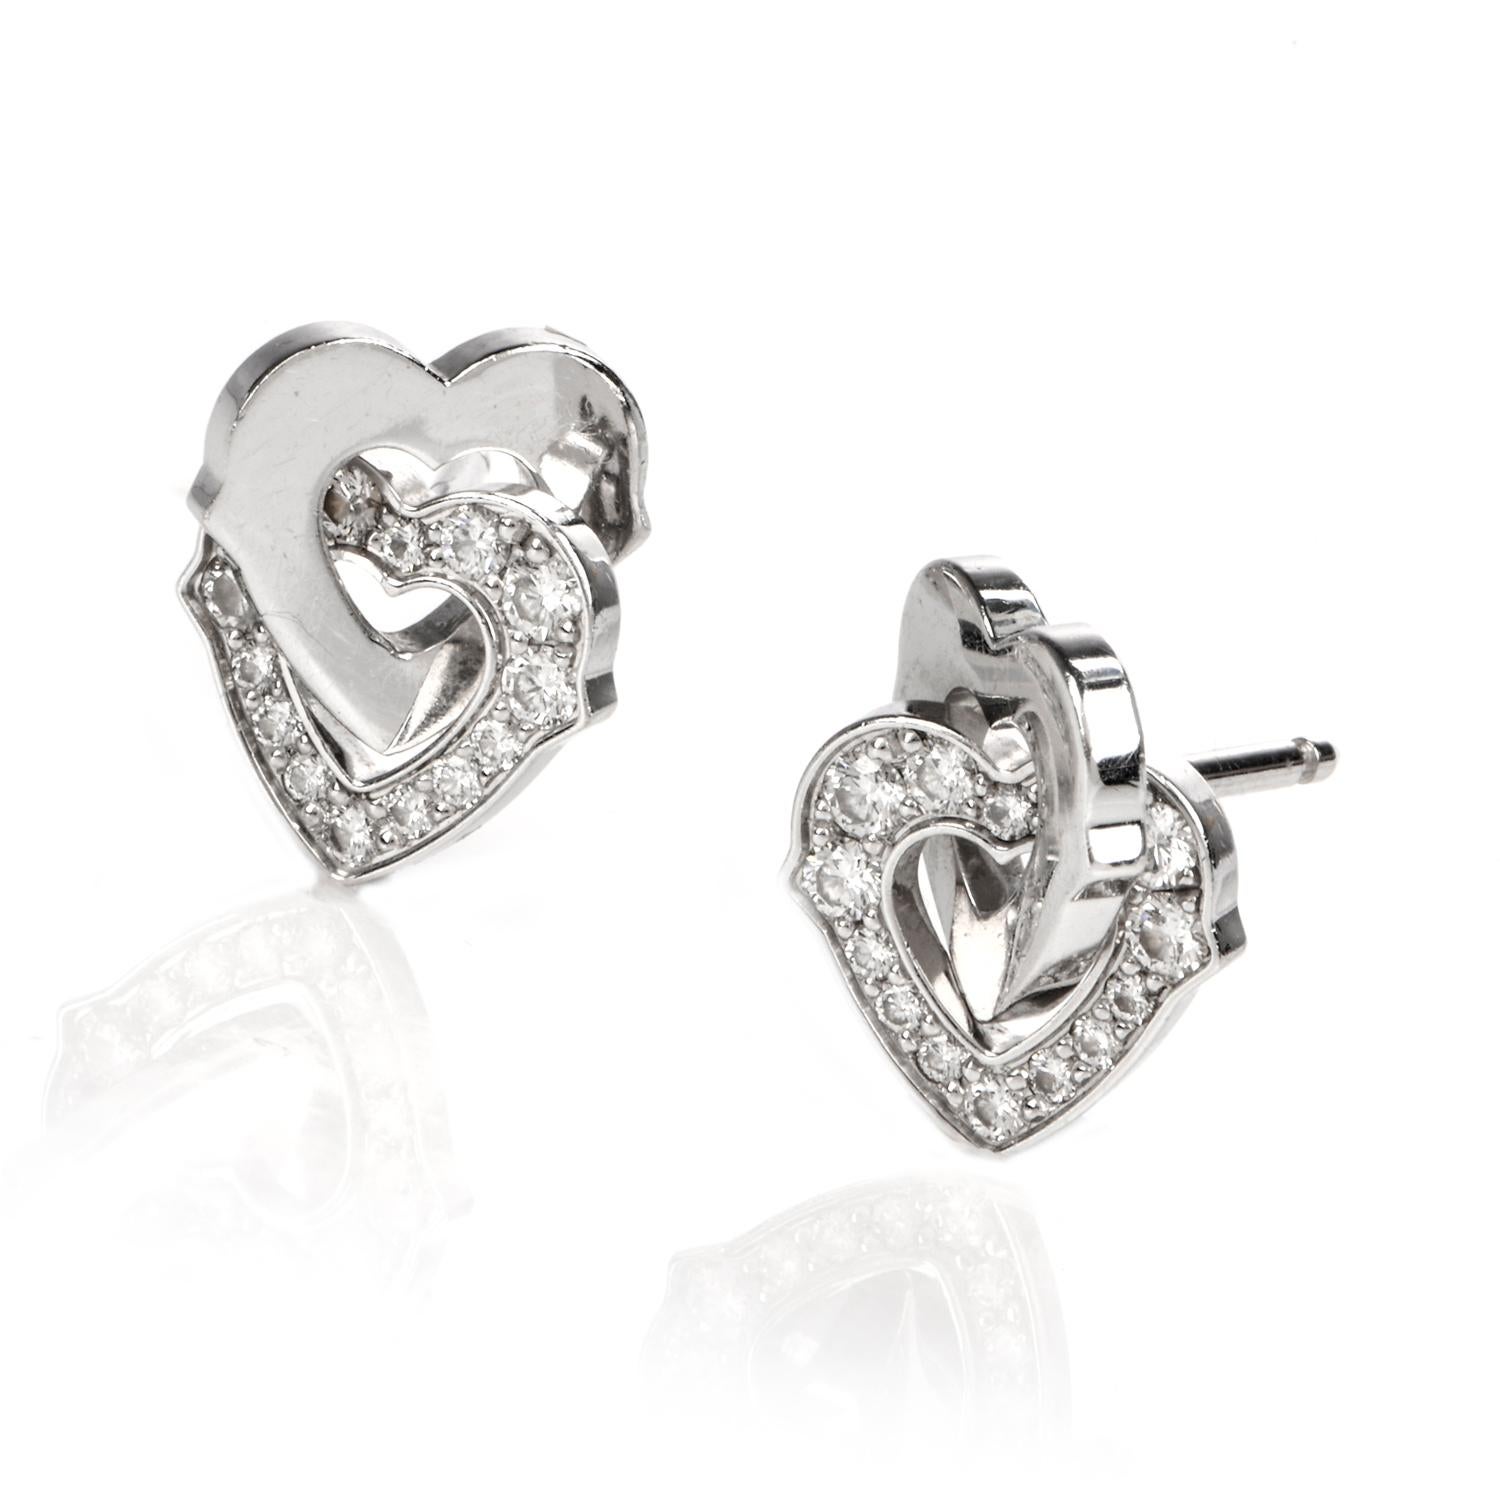 These charming Cartier diamond interlocking heart stud earrings are crafted in 18-karat white gold. Composed of two pairs of white gold open hearts interlocked with two pairs of pave-set round-cut diamond swathed open hearts. Diamonds collectively